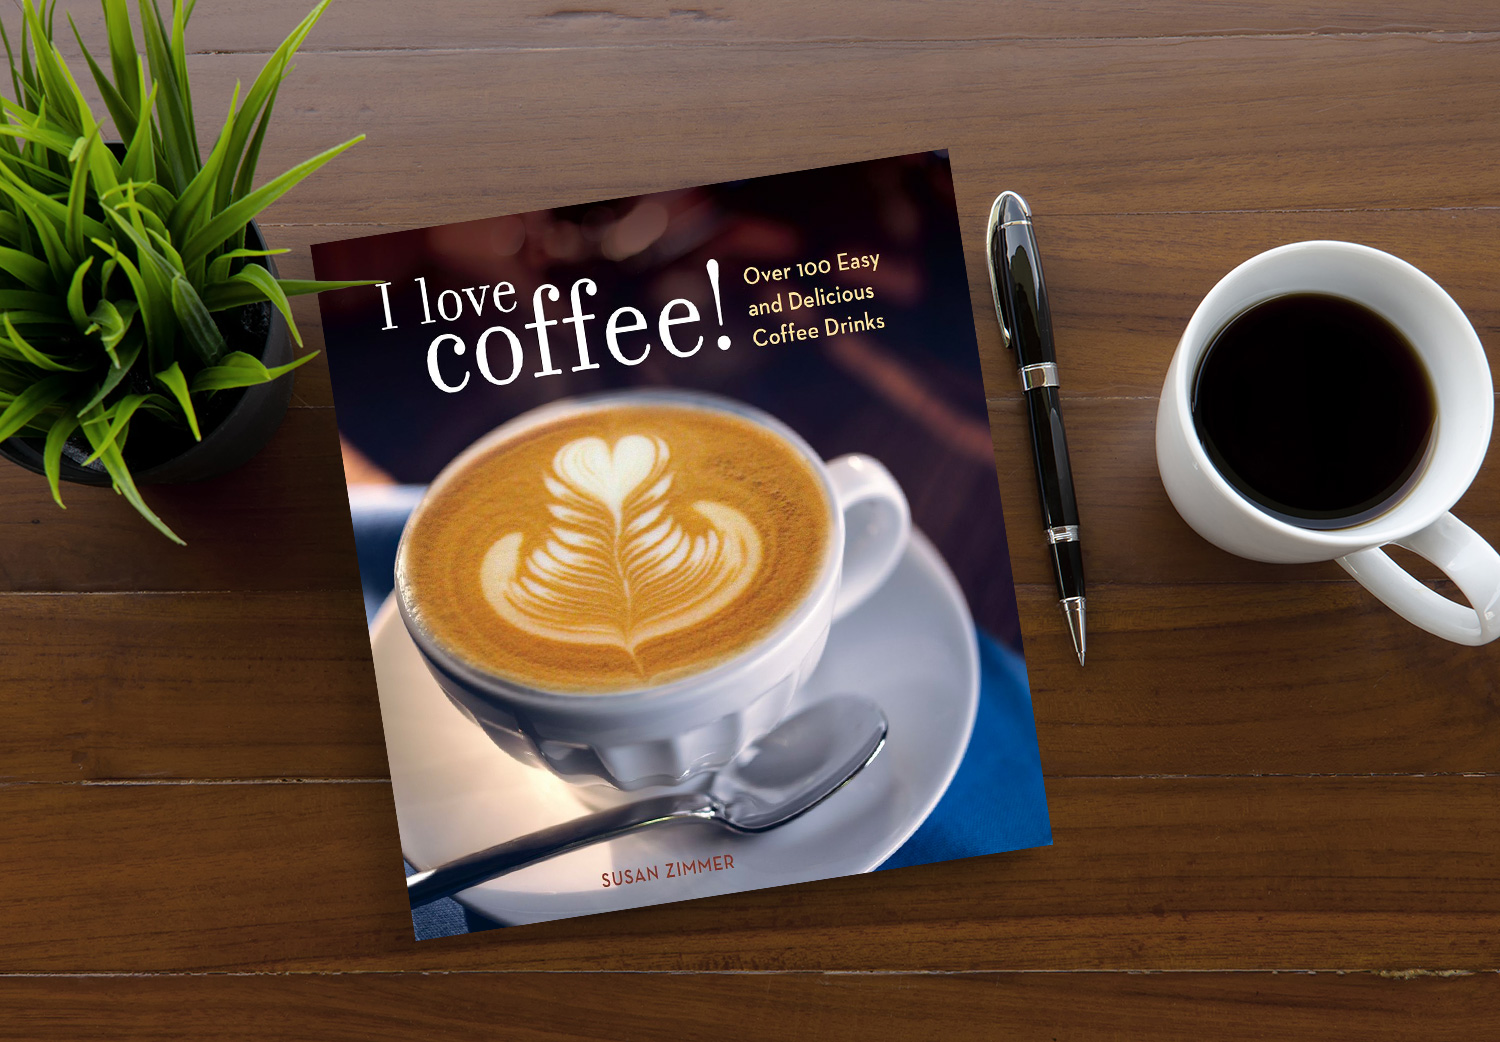 I Love Coffee! Over 100 Easy and Delicious Coffee Drinks by Susan Zimmer.